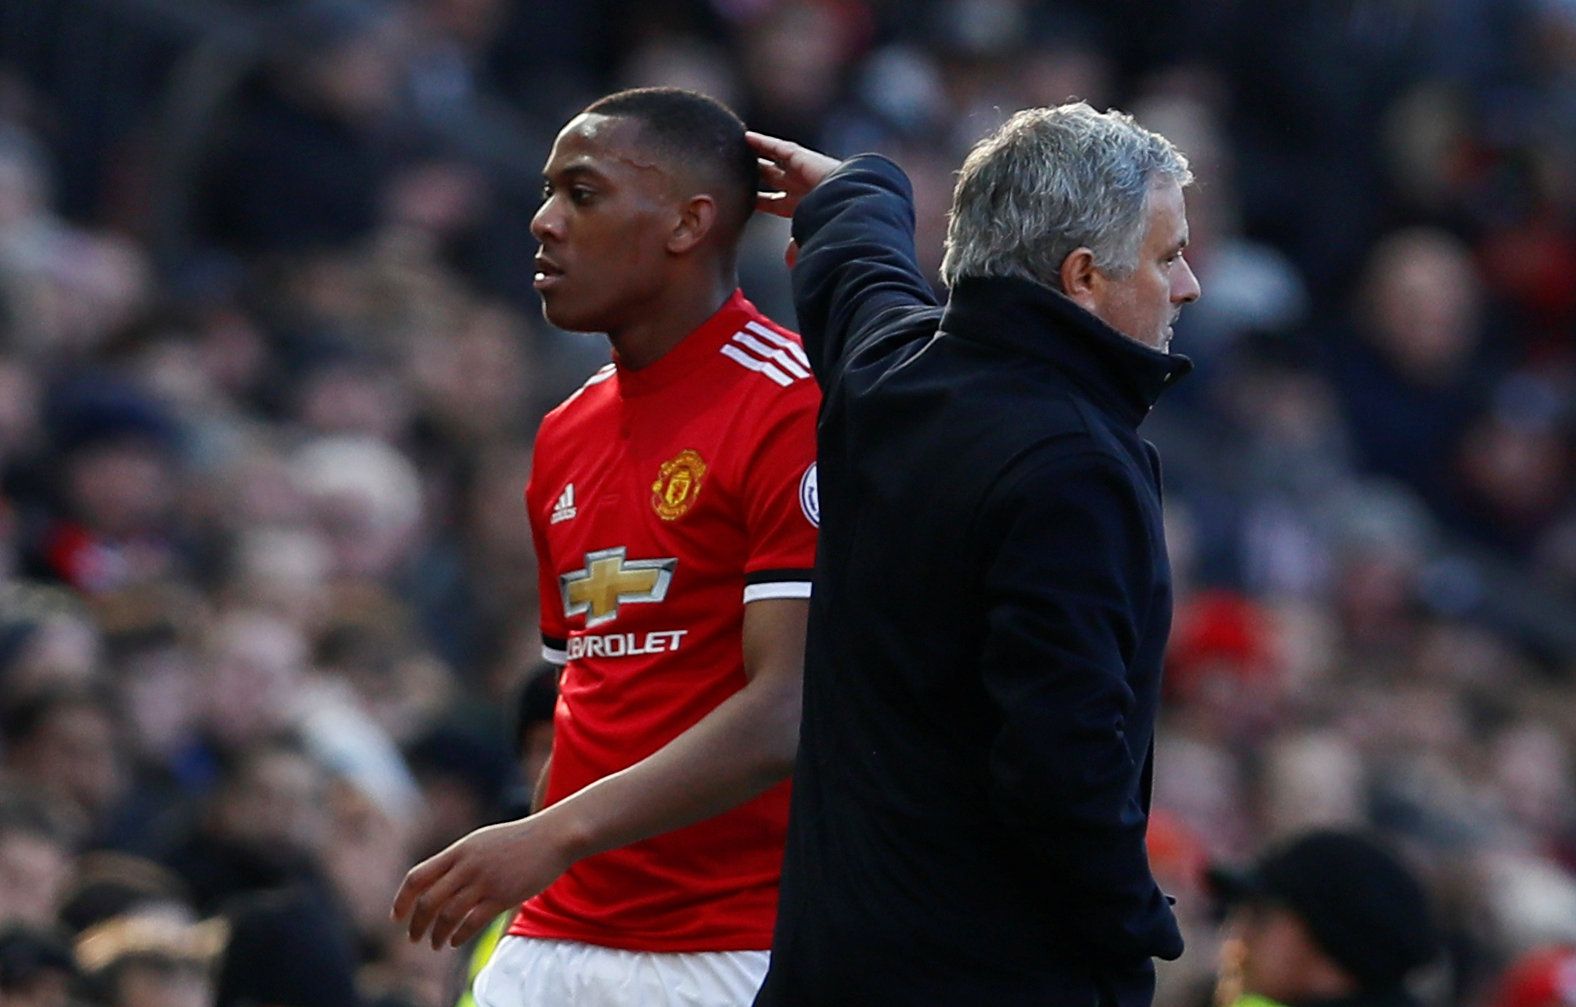 Soccer Football - Premier League - Manchester United vs Chelsea - Old Trafford, Manchester, Britain - February 25, 2018   Manchester United's Anthony Martial walks past manager Jose Mourinho as he is substituted    Action Images via Reuters/Jason Cairnduff    EDITORIAL USE ONLY. No use with unauthorized audio, video, data, fixture lists, club/league logos or 